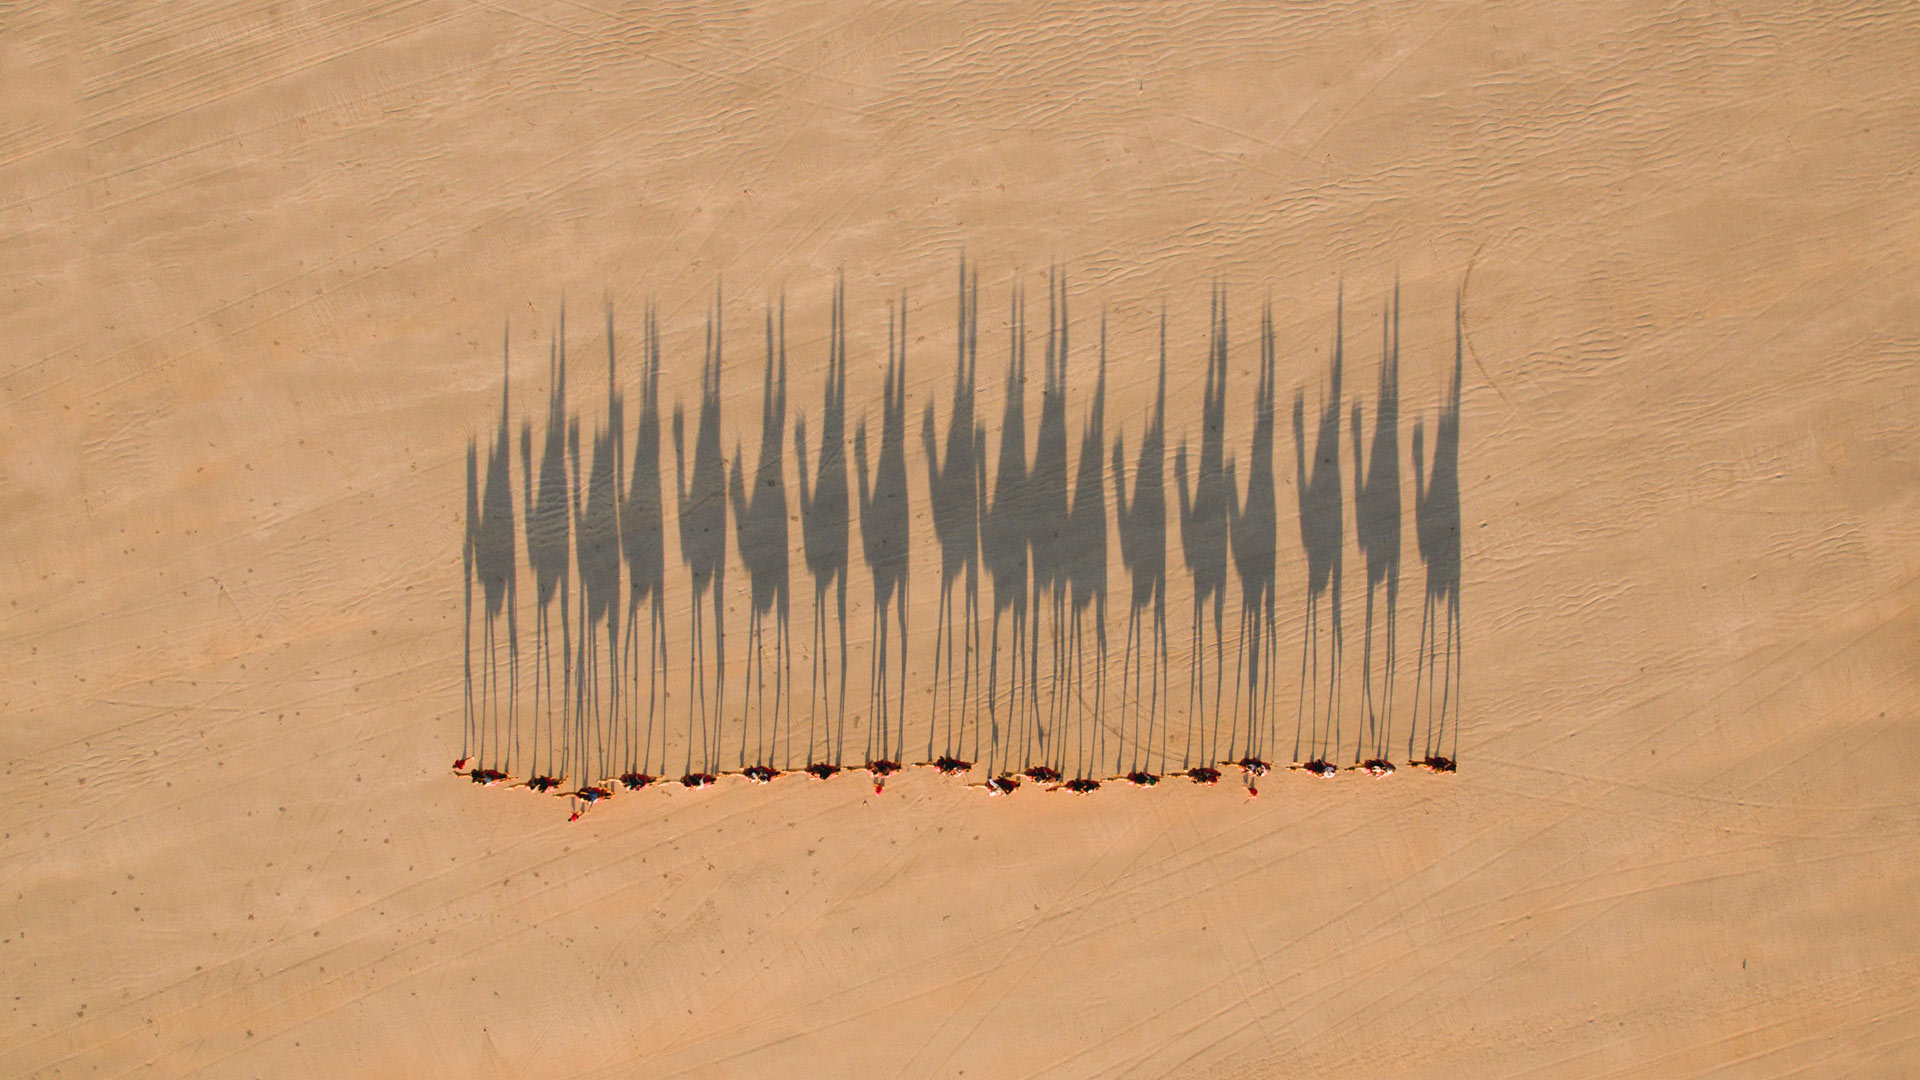 Camels Broome